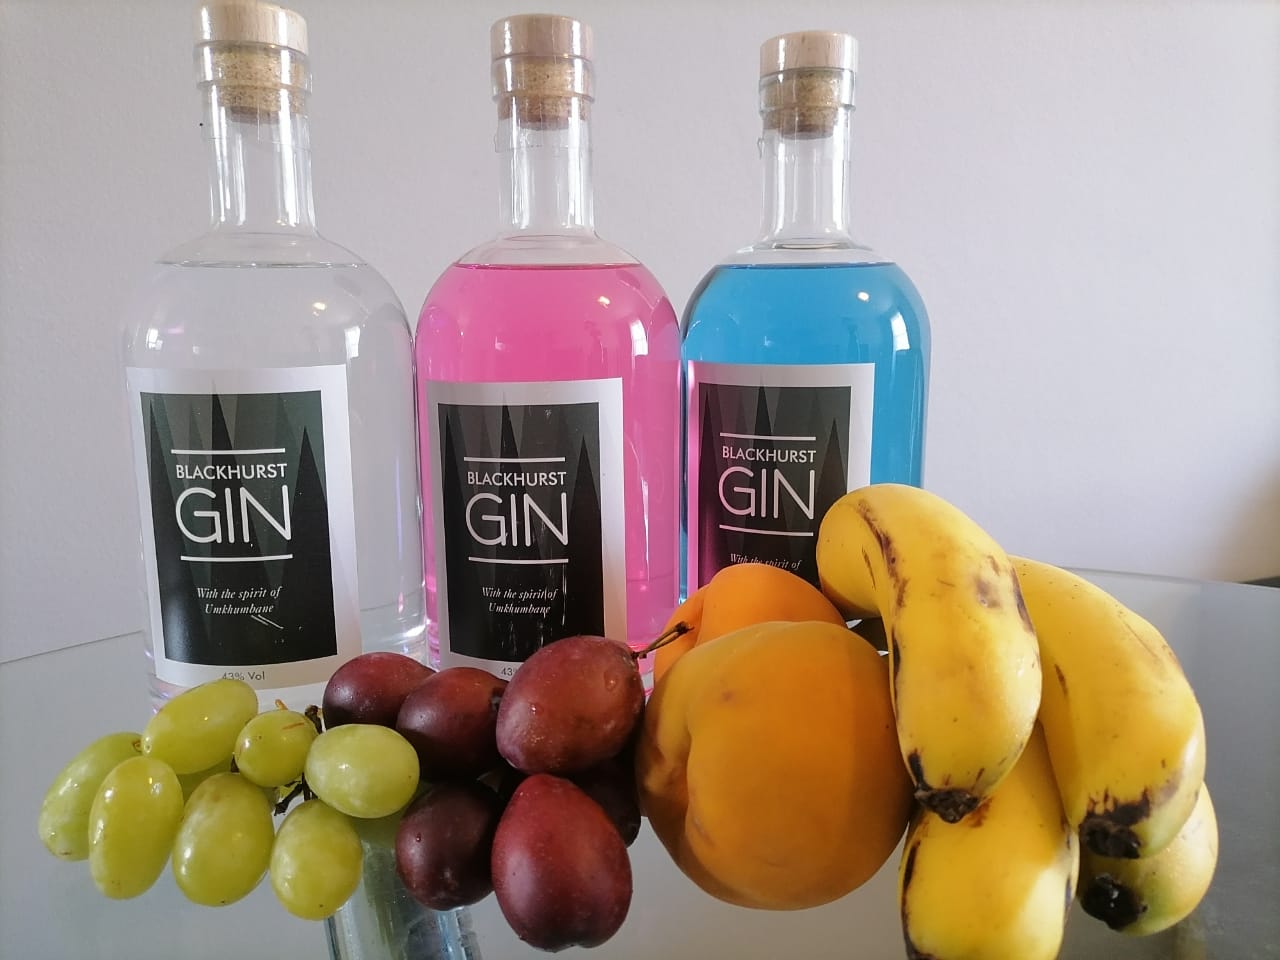 Blackhurst Gin is made with cape Towns finest Botanicals and flavors to give you a fresh aroma, it has 3 flavours namely the Grapeskin, Grapefruit and Blueberries 